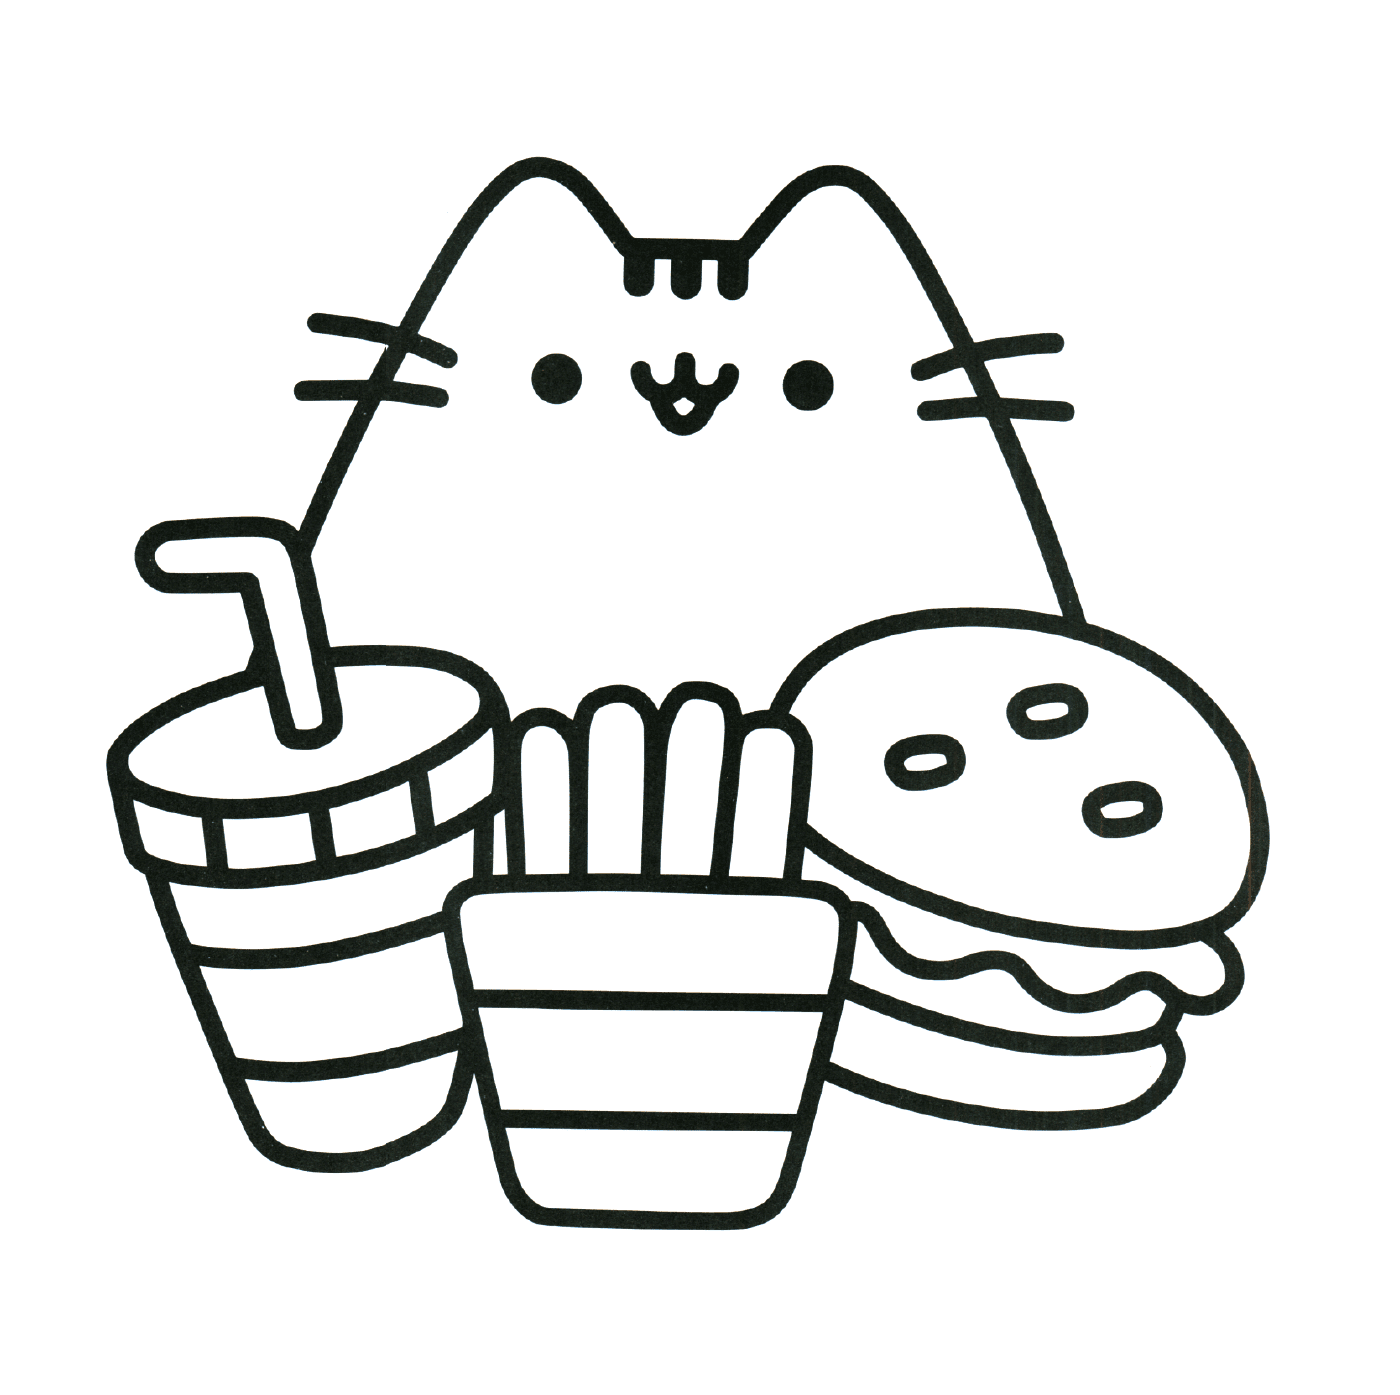  Pusheen ready to eat, delicious feast 